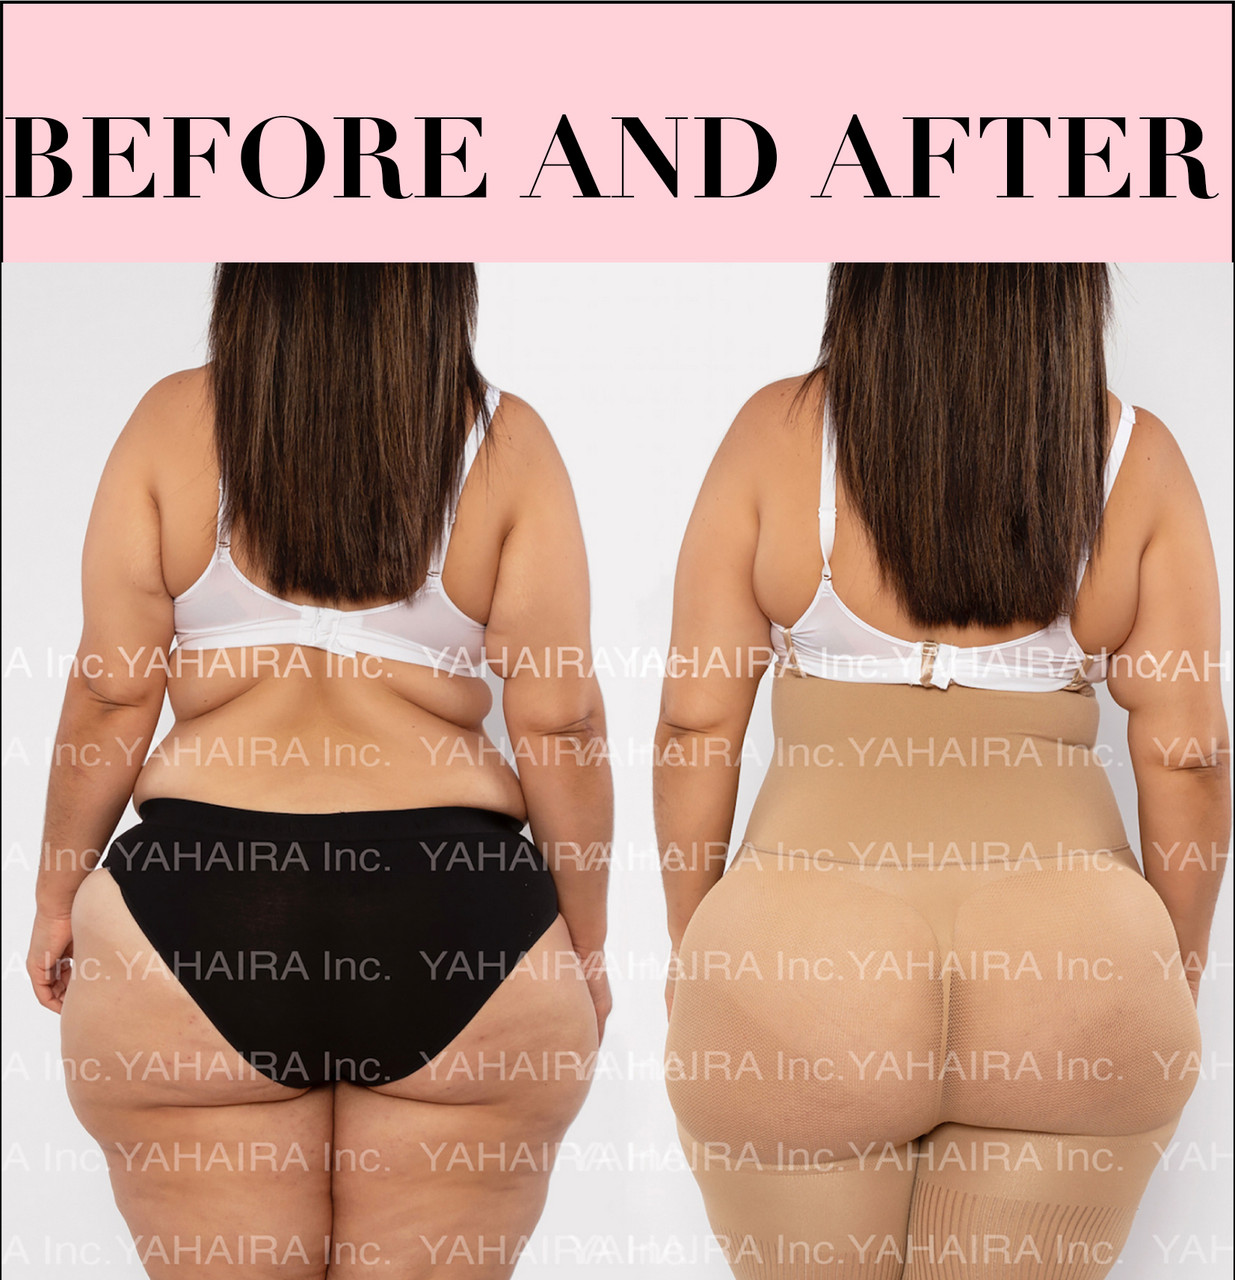 Real Shapewear Yahaira review ❤️  💕Real Review of our Happy Butt No.7  body shapers by Ashley Lopez ❤️ If you'd like to know your size comment  below with your pant size